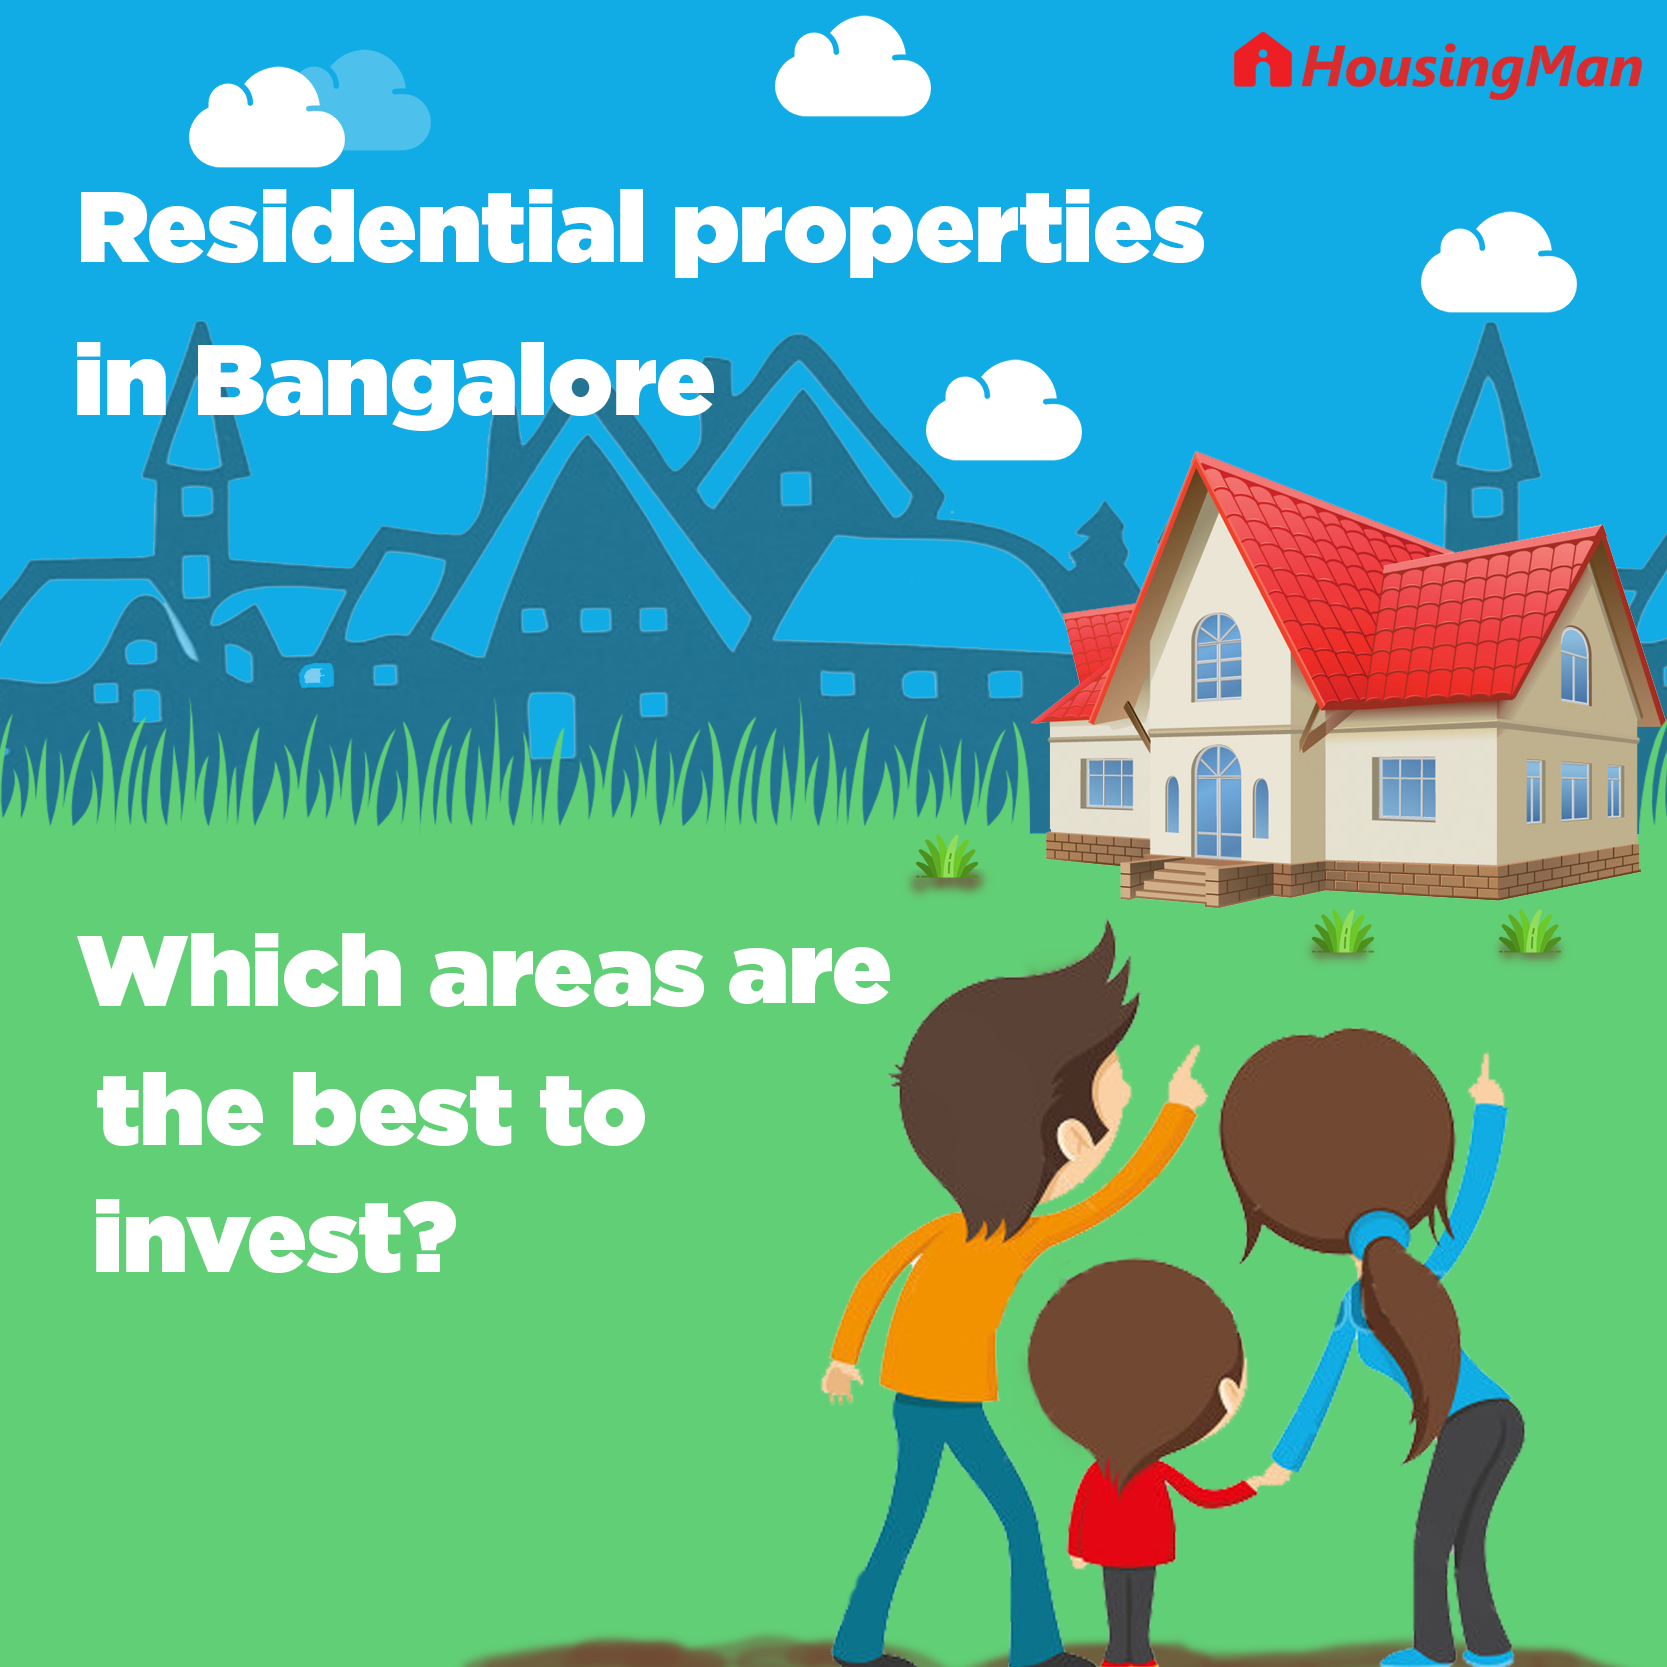 Residential properties in Bangalore: Which areas are the best to invest?